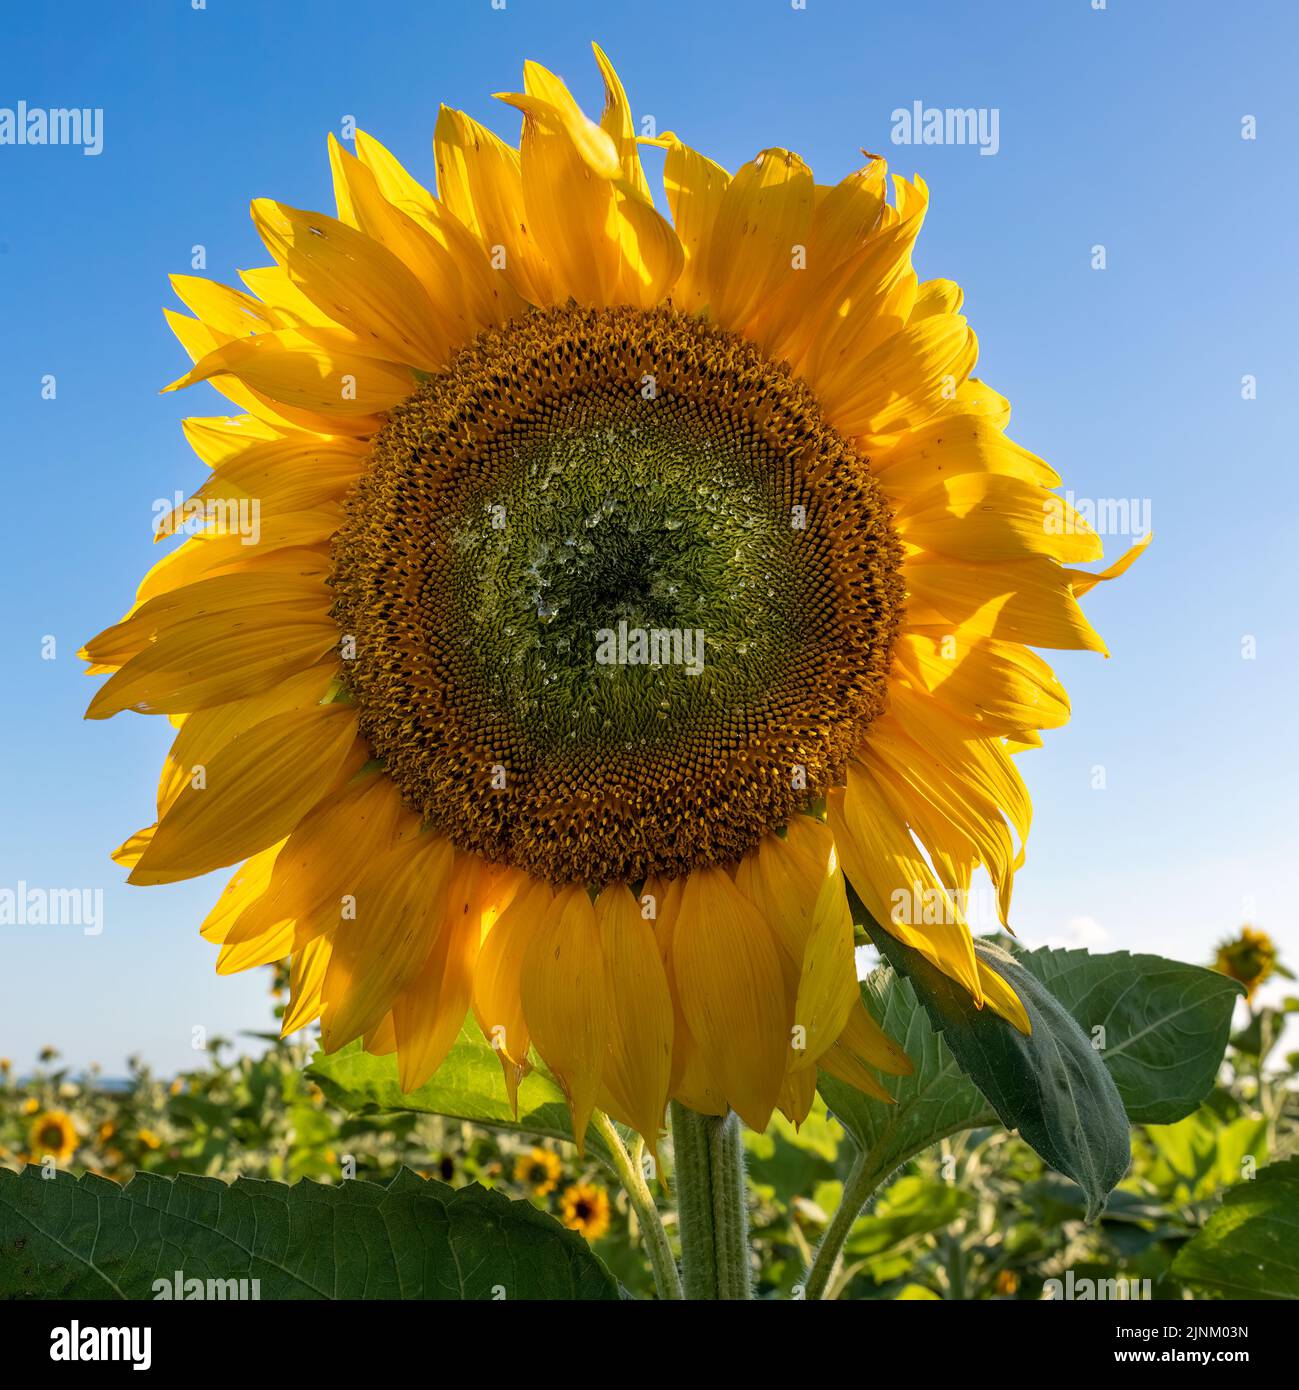 Sunflowers in a Field Stock Photo